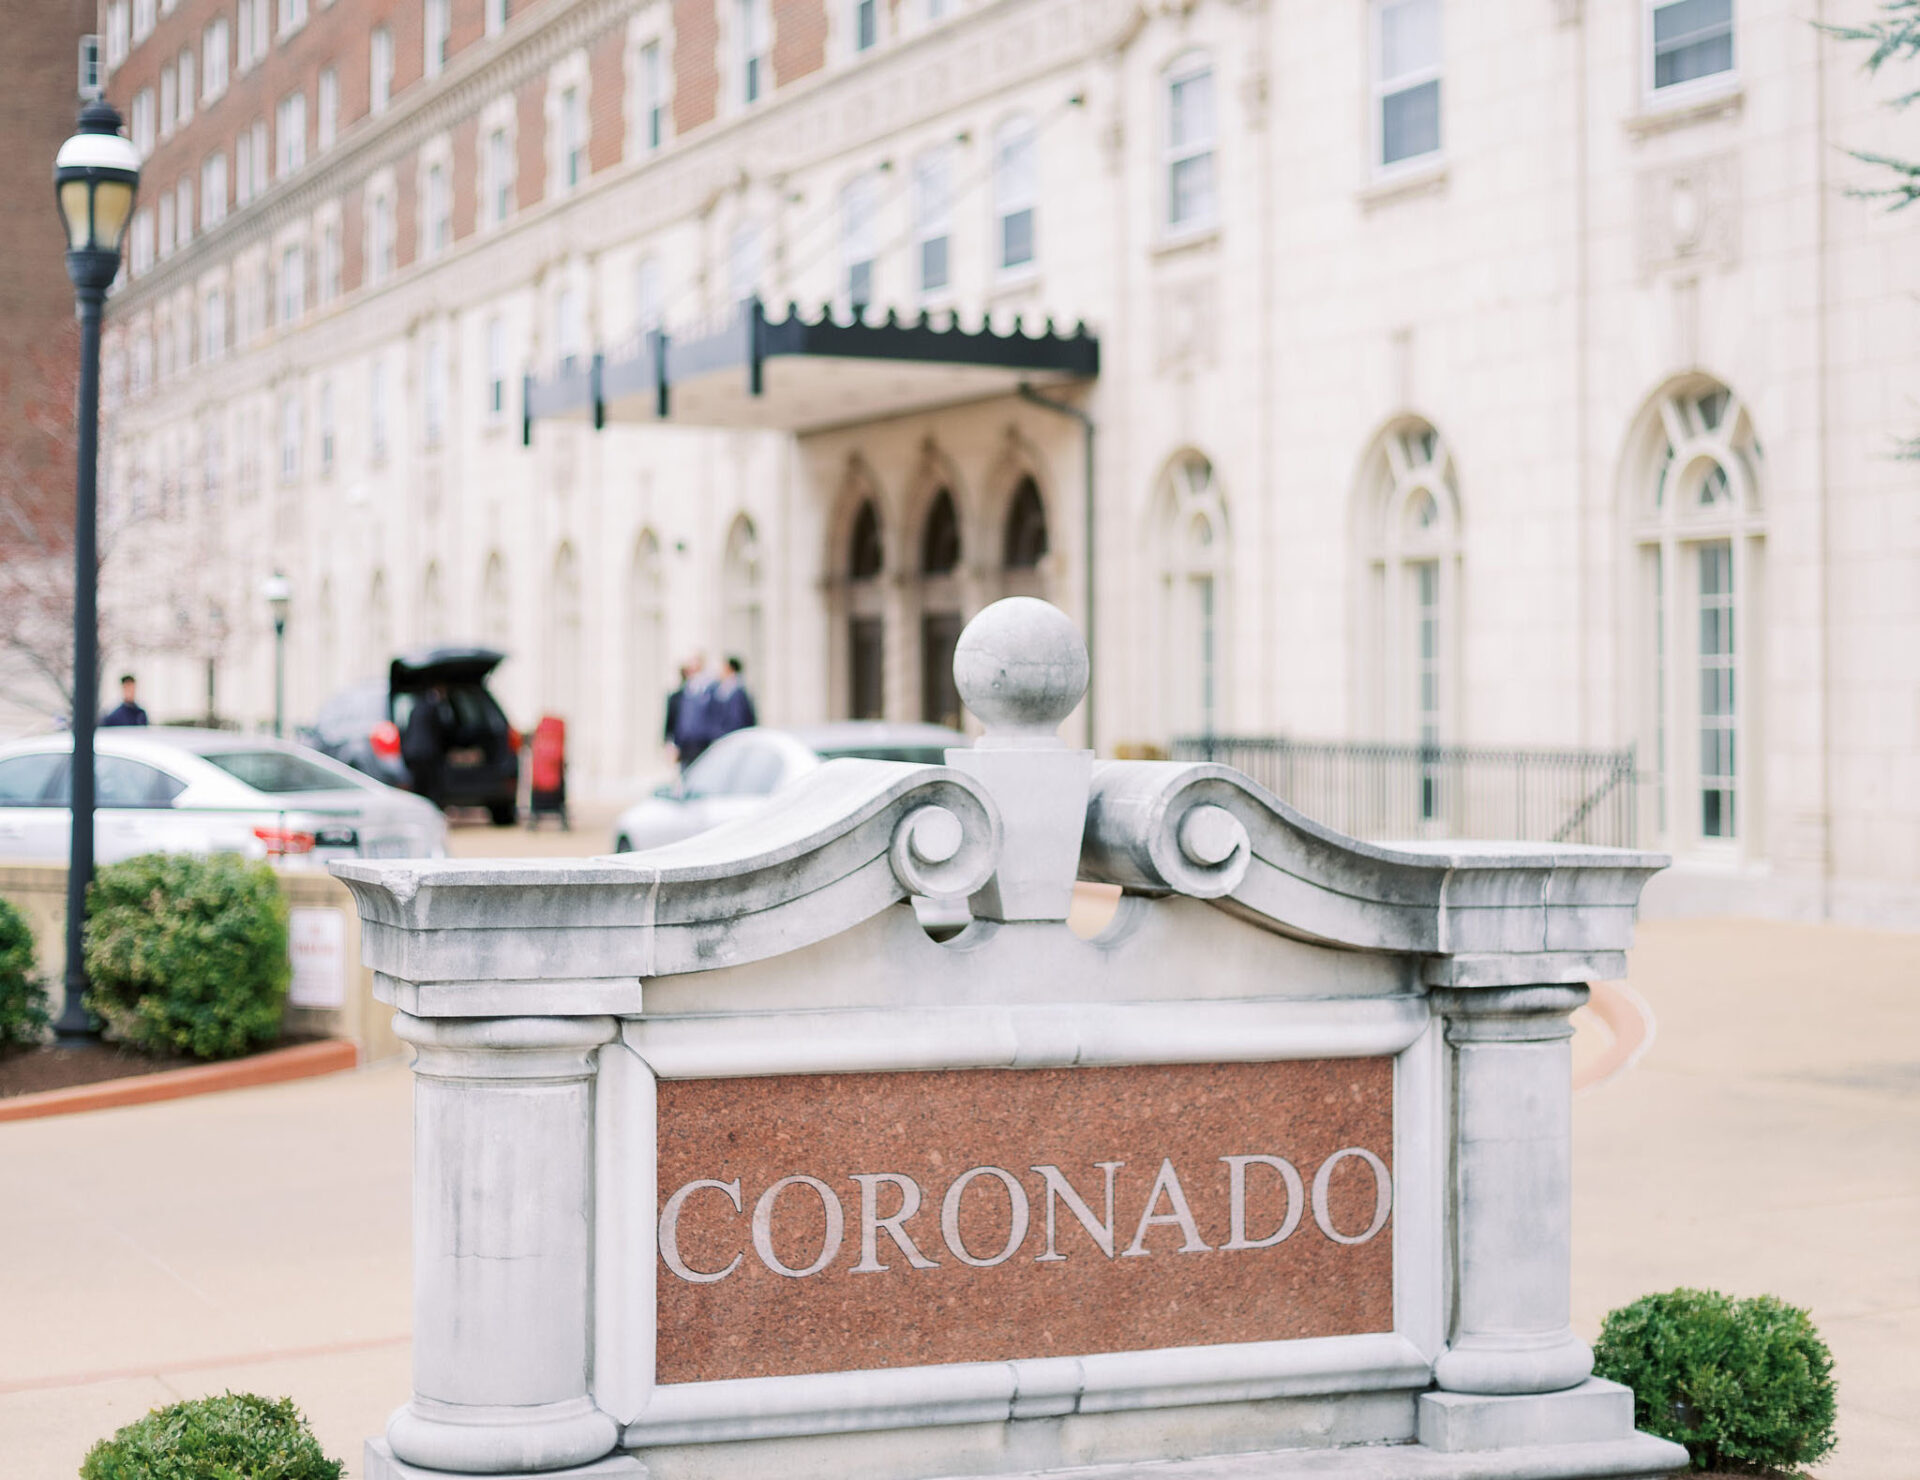 Etched stone sign that says "Coronado" in front of the Coronado venue